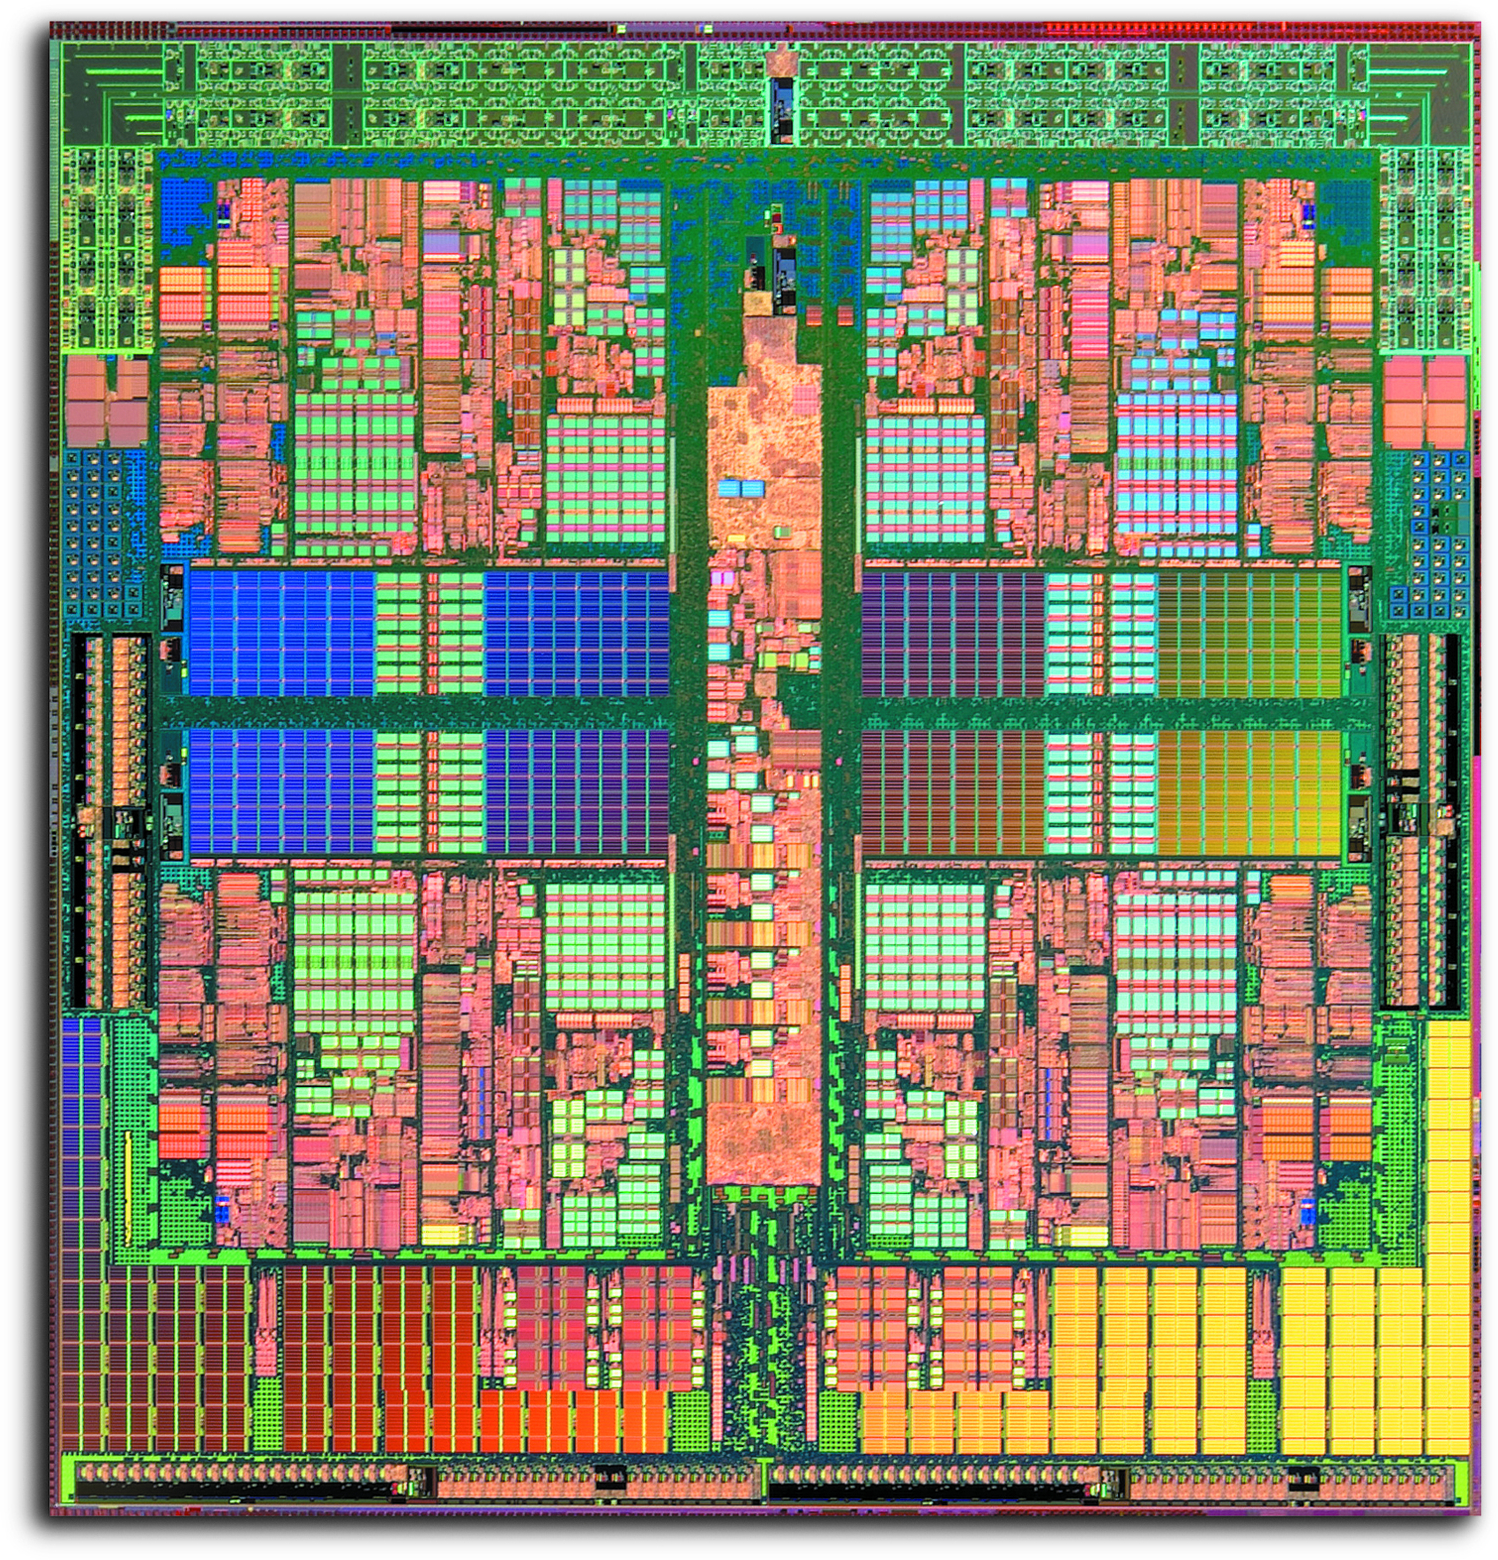 General 1498x1560 CPU assembly AMD technology hardware